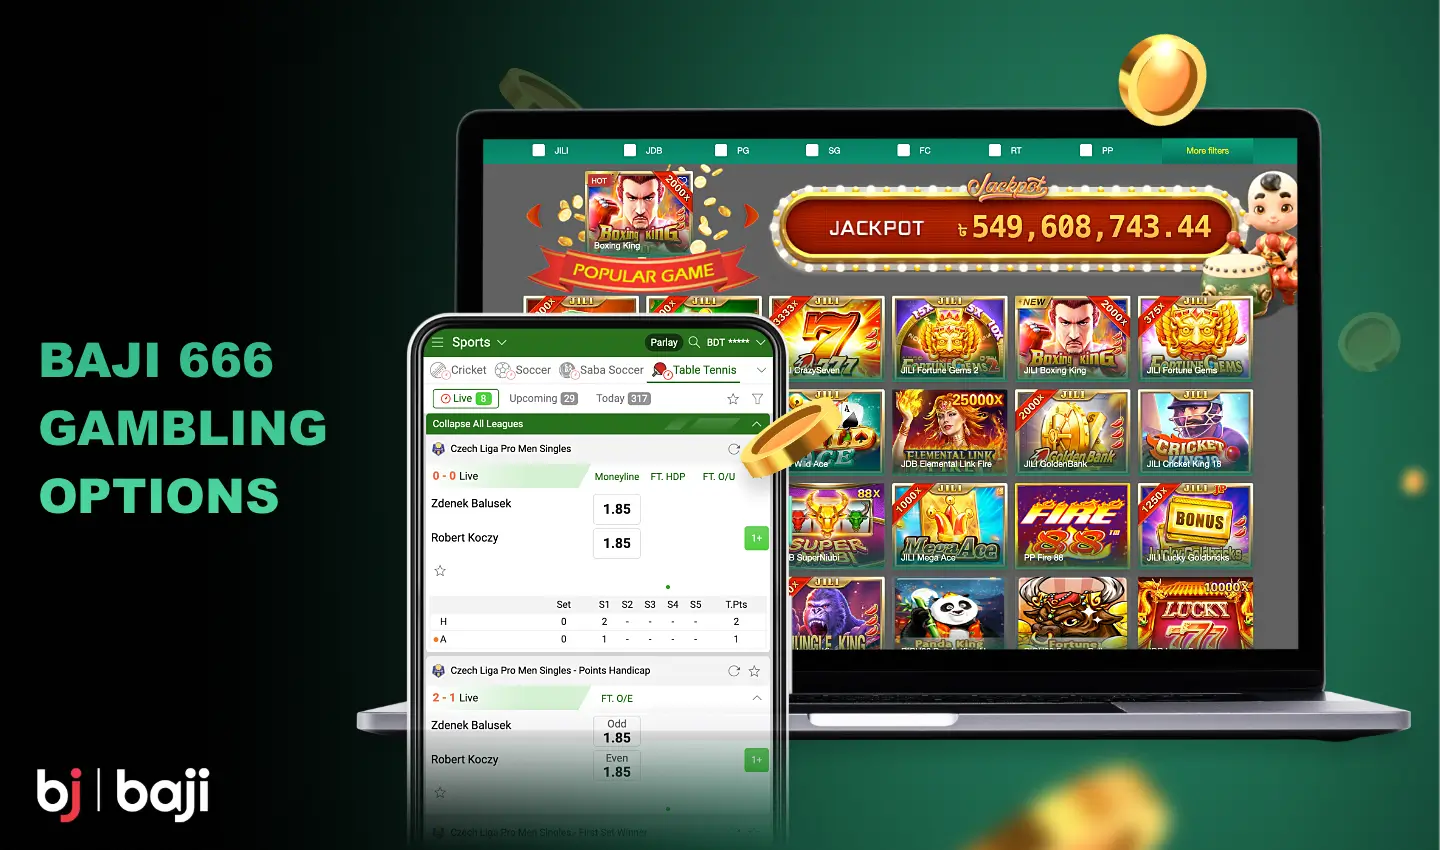 Baji 666 offers its users a variety of gambling games ranging from casino games to sports betting